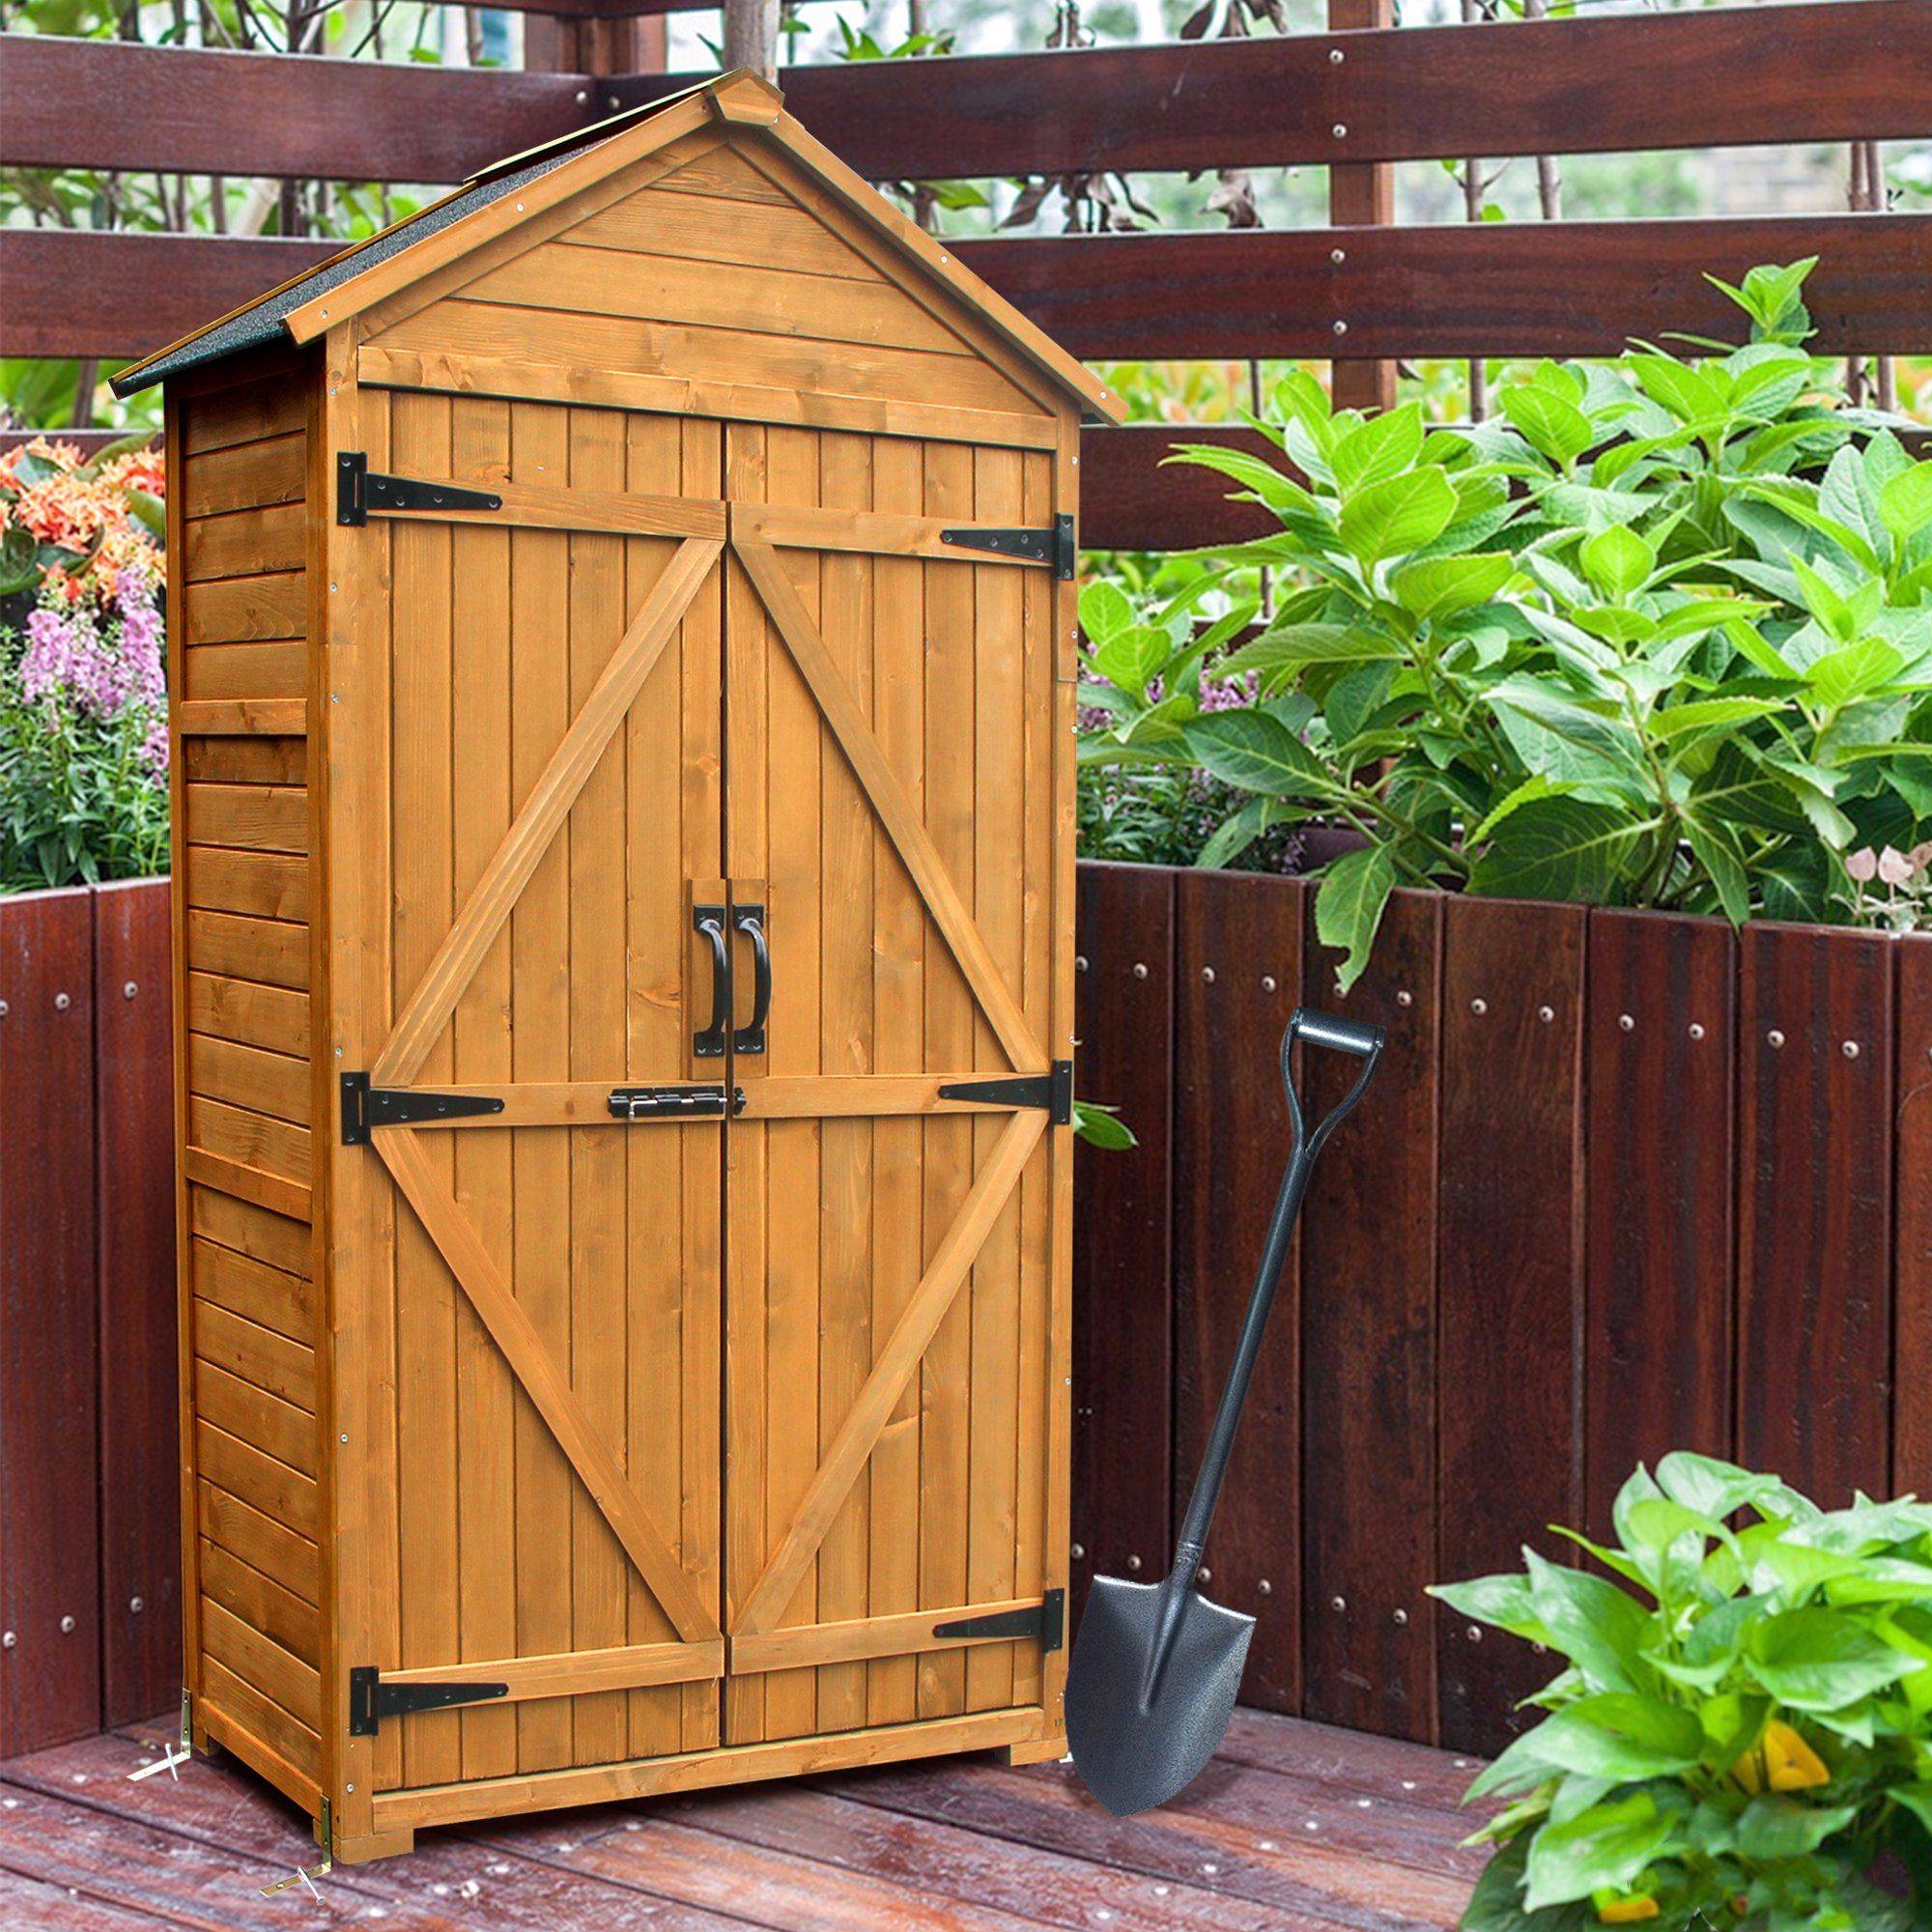 Mcombo Outdoor Storage Cabinet Tool Shed Wooden Garden